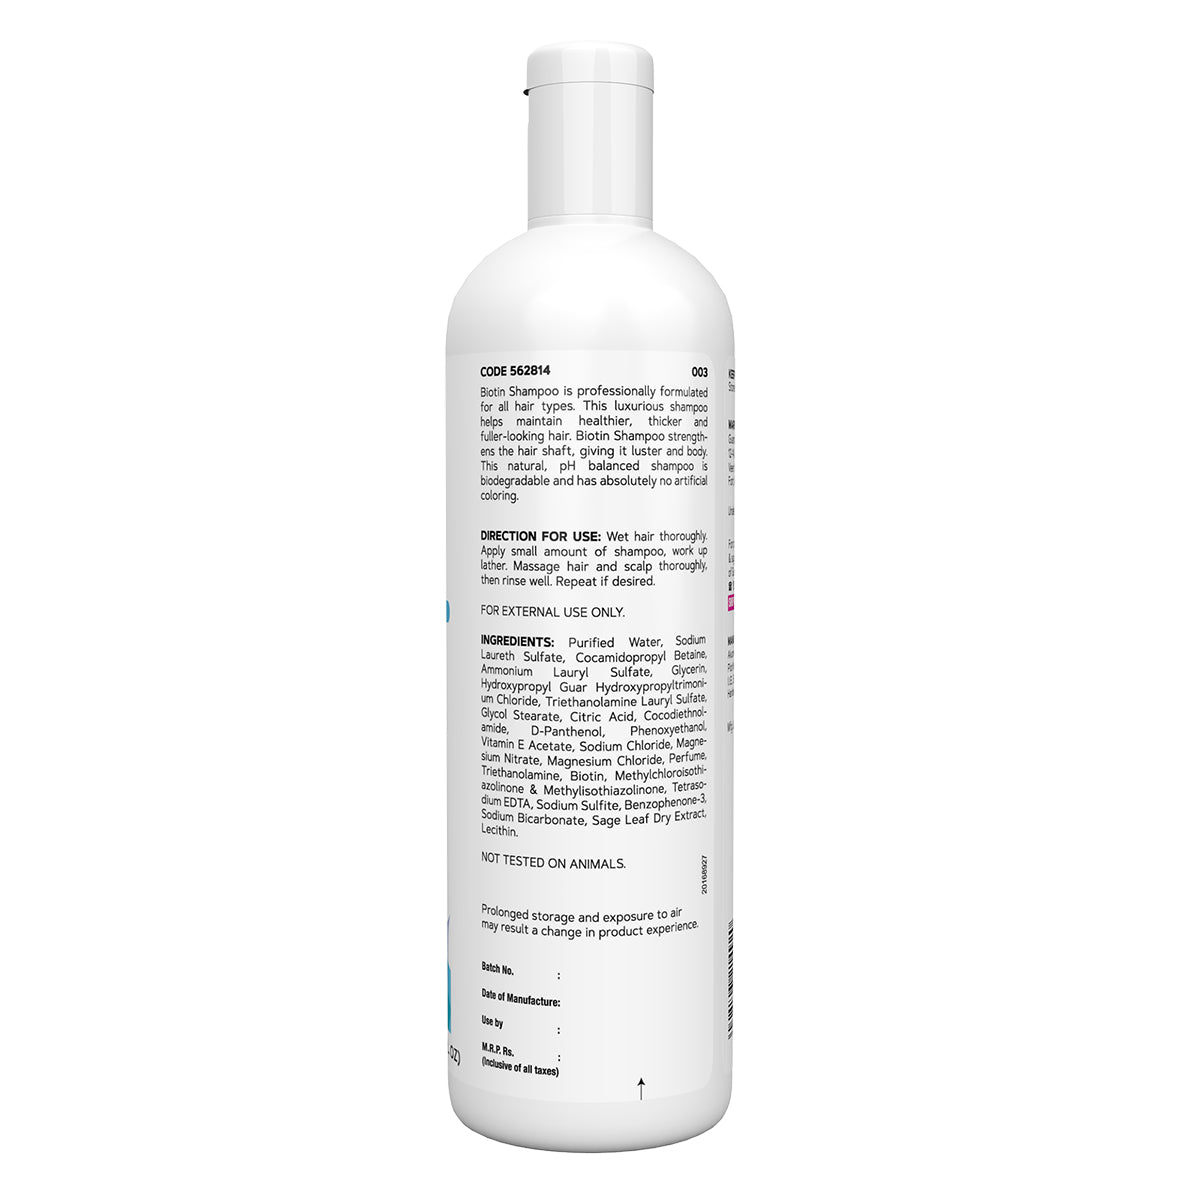 Buy Healthvit Biotin Hair Growth Shampoo 200 ml Online at Best Price   Shampoos and Conditioners